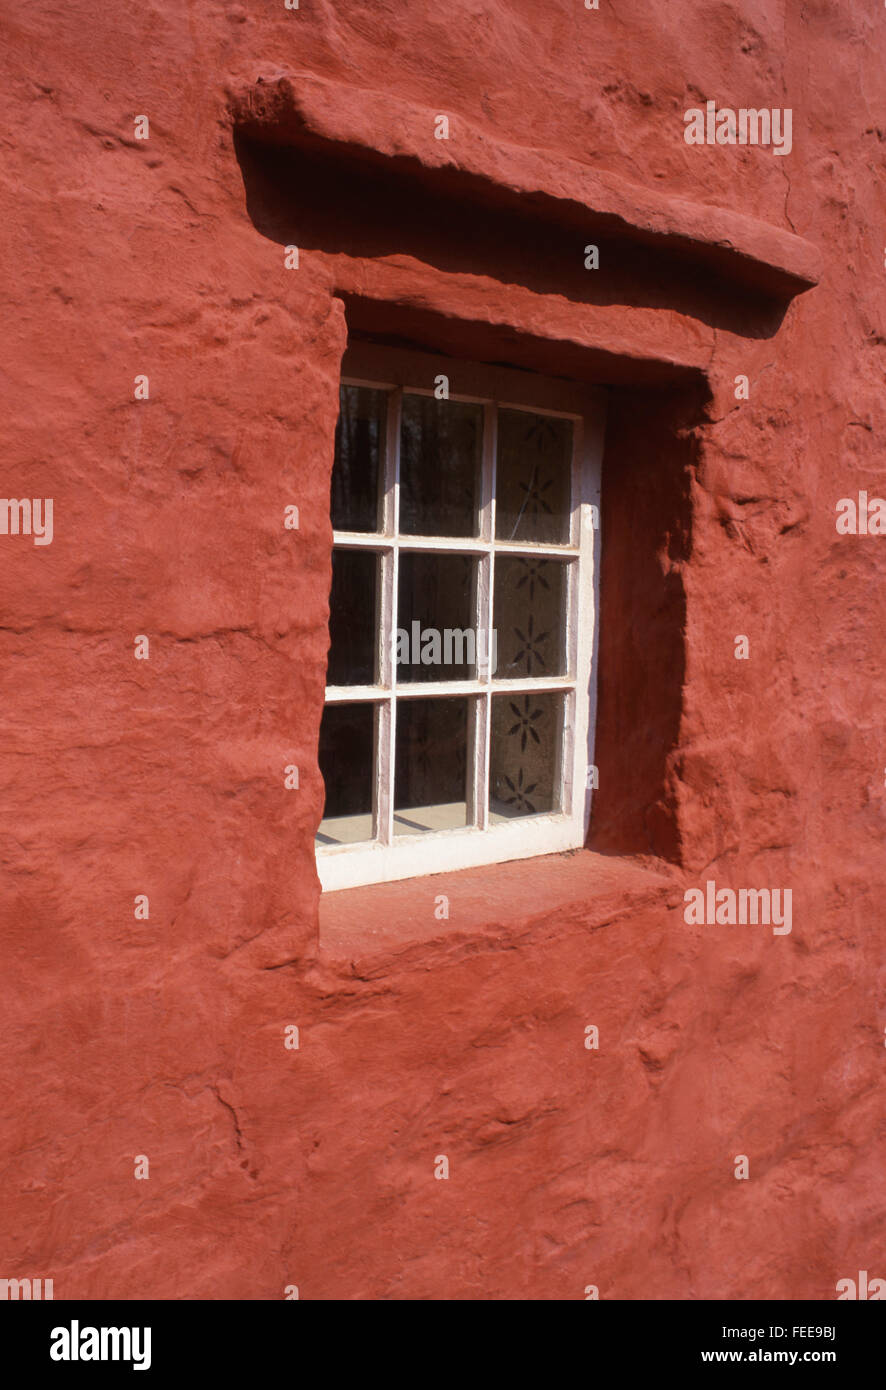 Kennixton Farmhouse window surrounded by red painted wall Reconstructed farmhouse at National History Museum Cardiff Wales UK Stock Photo